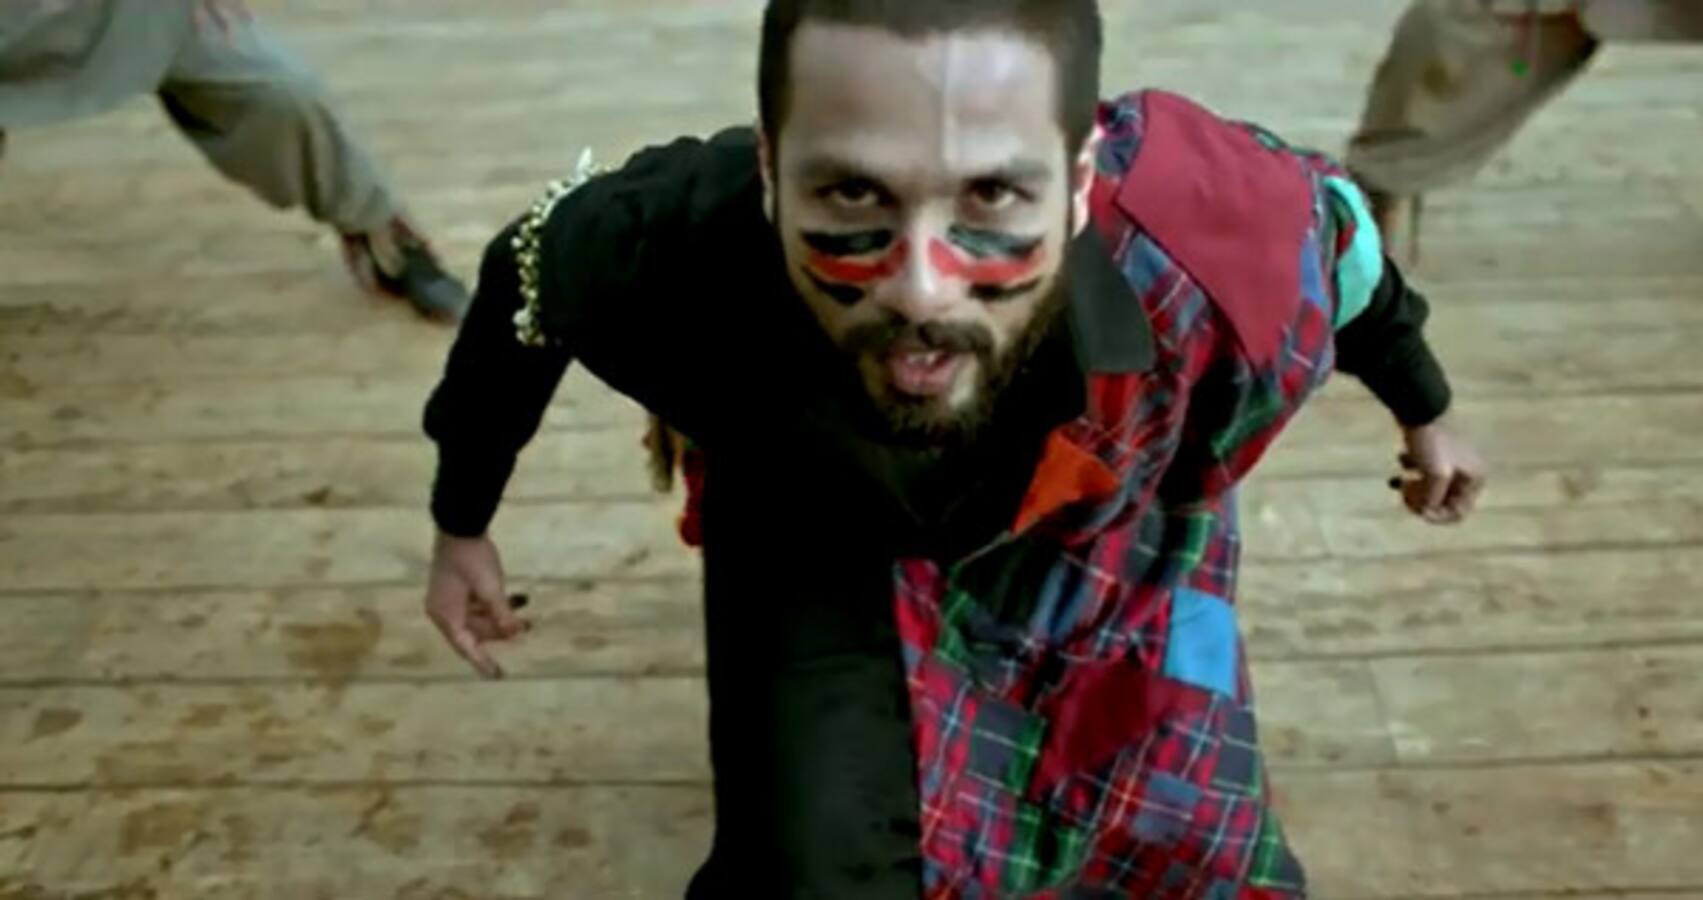 Why was Shahid Kapoor apprehensive about his dance in Haider?